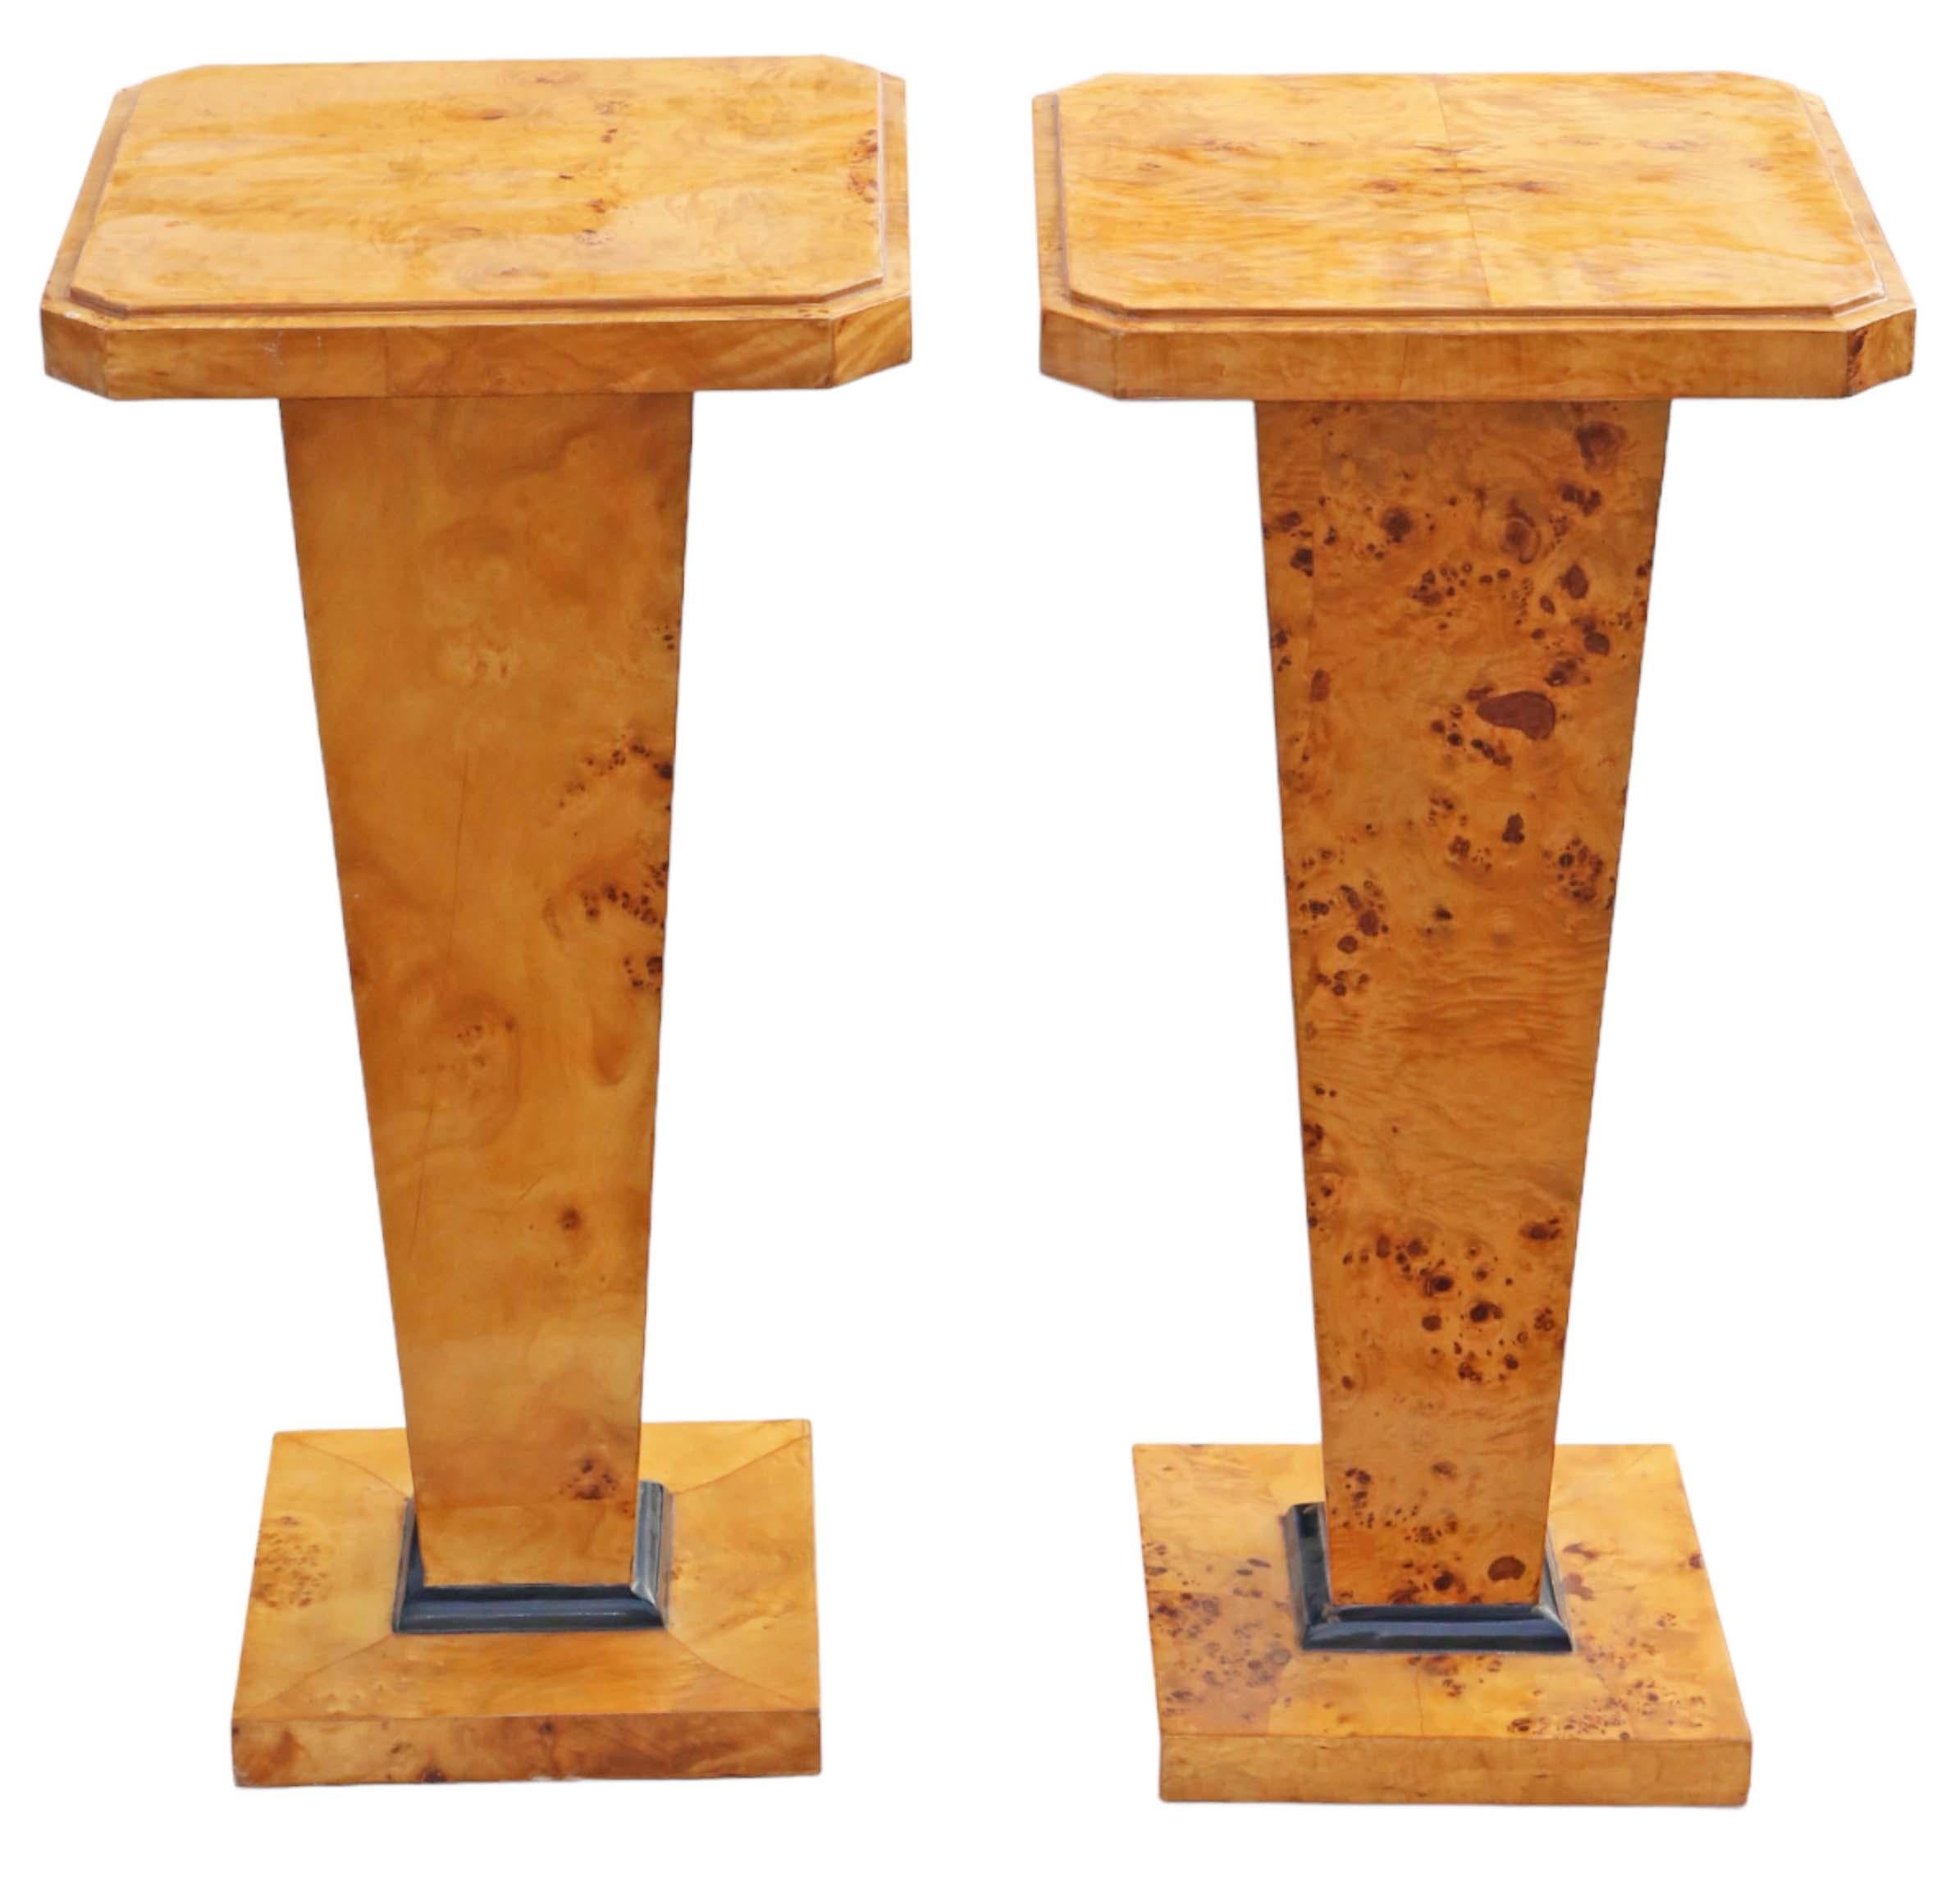 Pair of vintage late 20th Century burr yew pedestal lamp or side tables.

These tables are solid with no loose joints, presenting themselves as charming and rare decorative finds.

There is no evidence of woodworm, and their aesthetic would